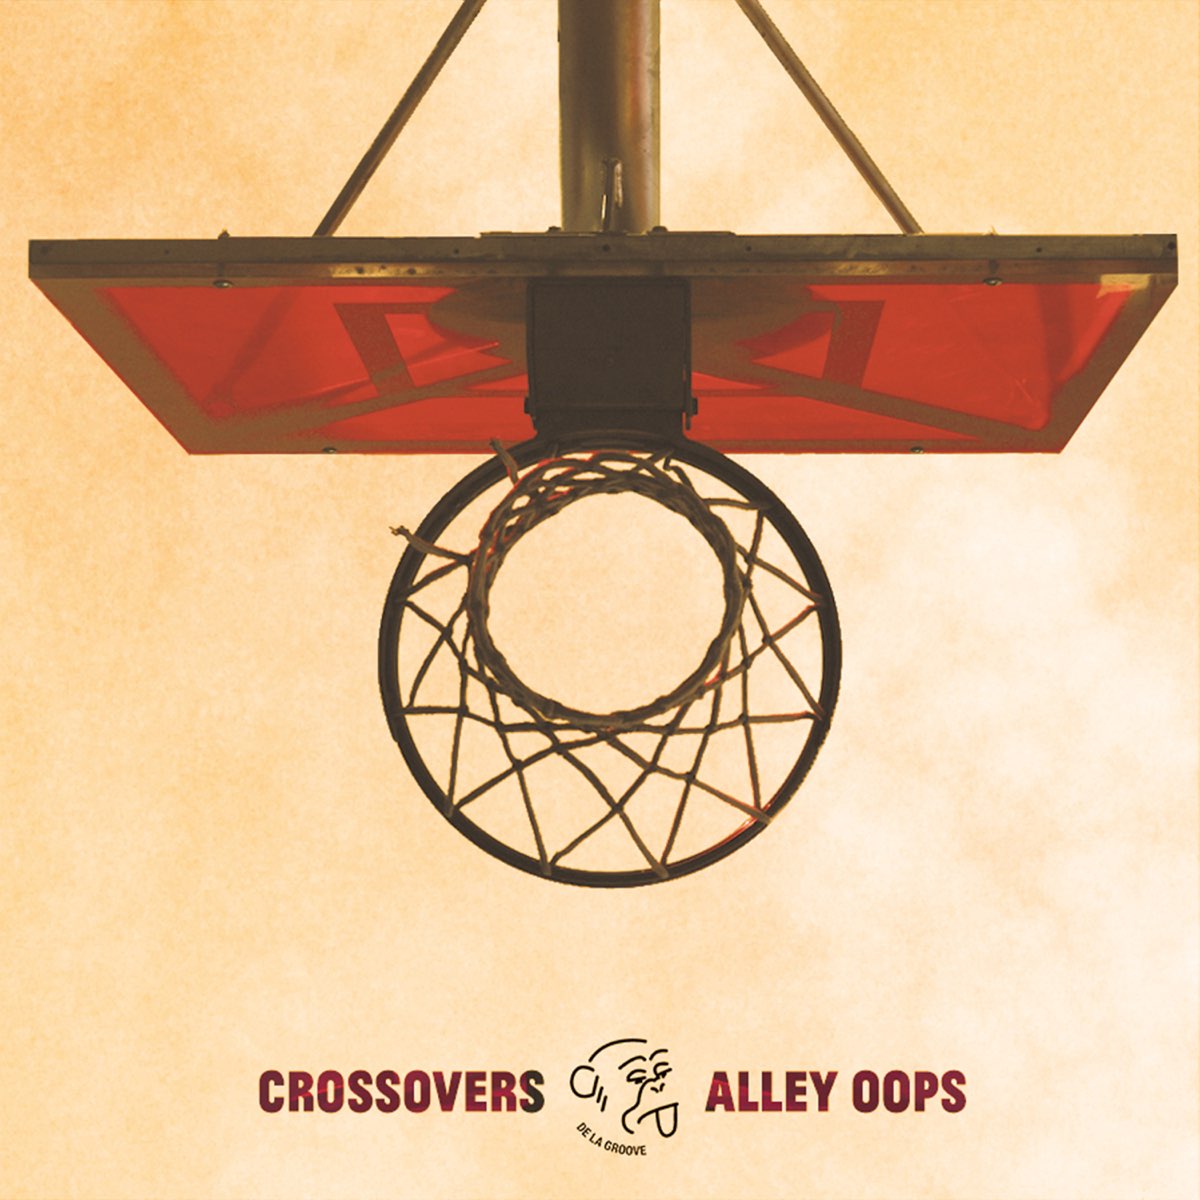 ‎Crossovers Alley Oops by Various Artists on Apple Music